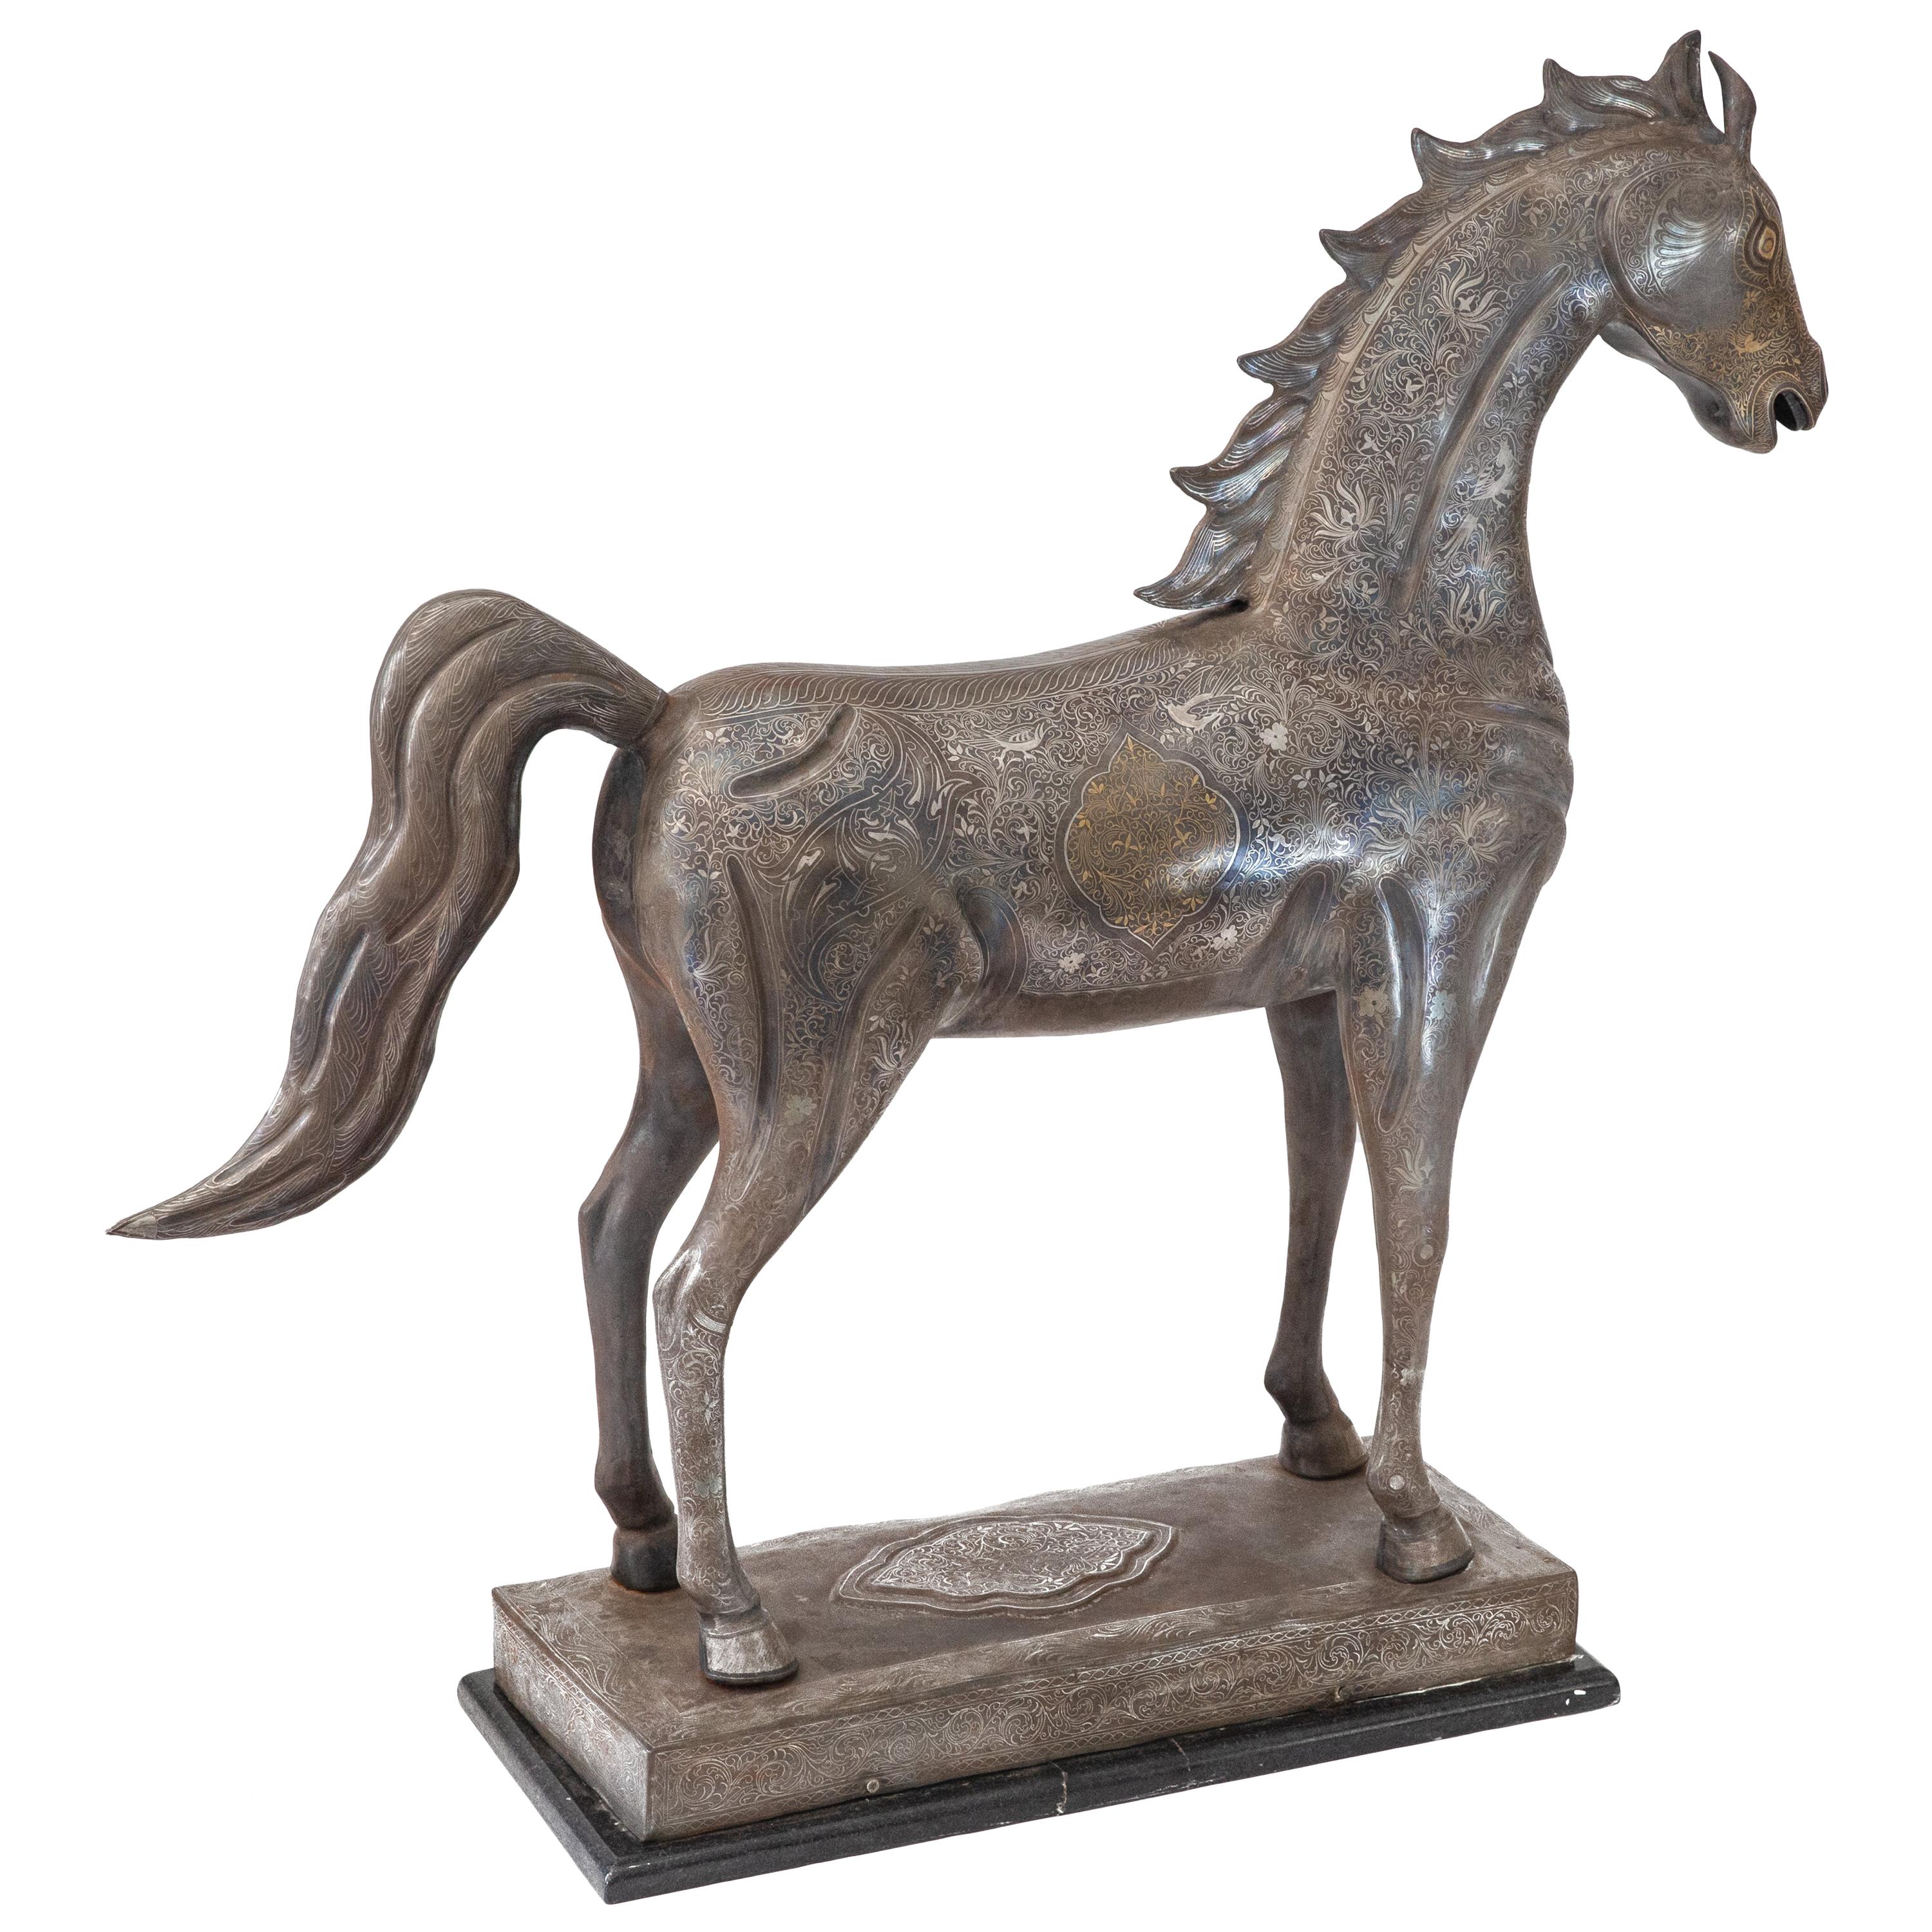 Monumental Exhibition Damascene Real Gold and Silver Inlaid Horse Sculpture